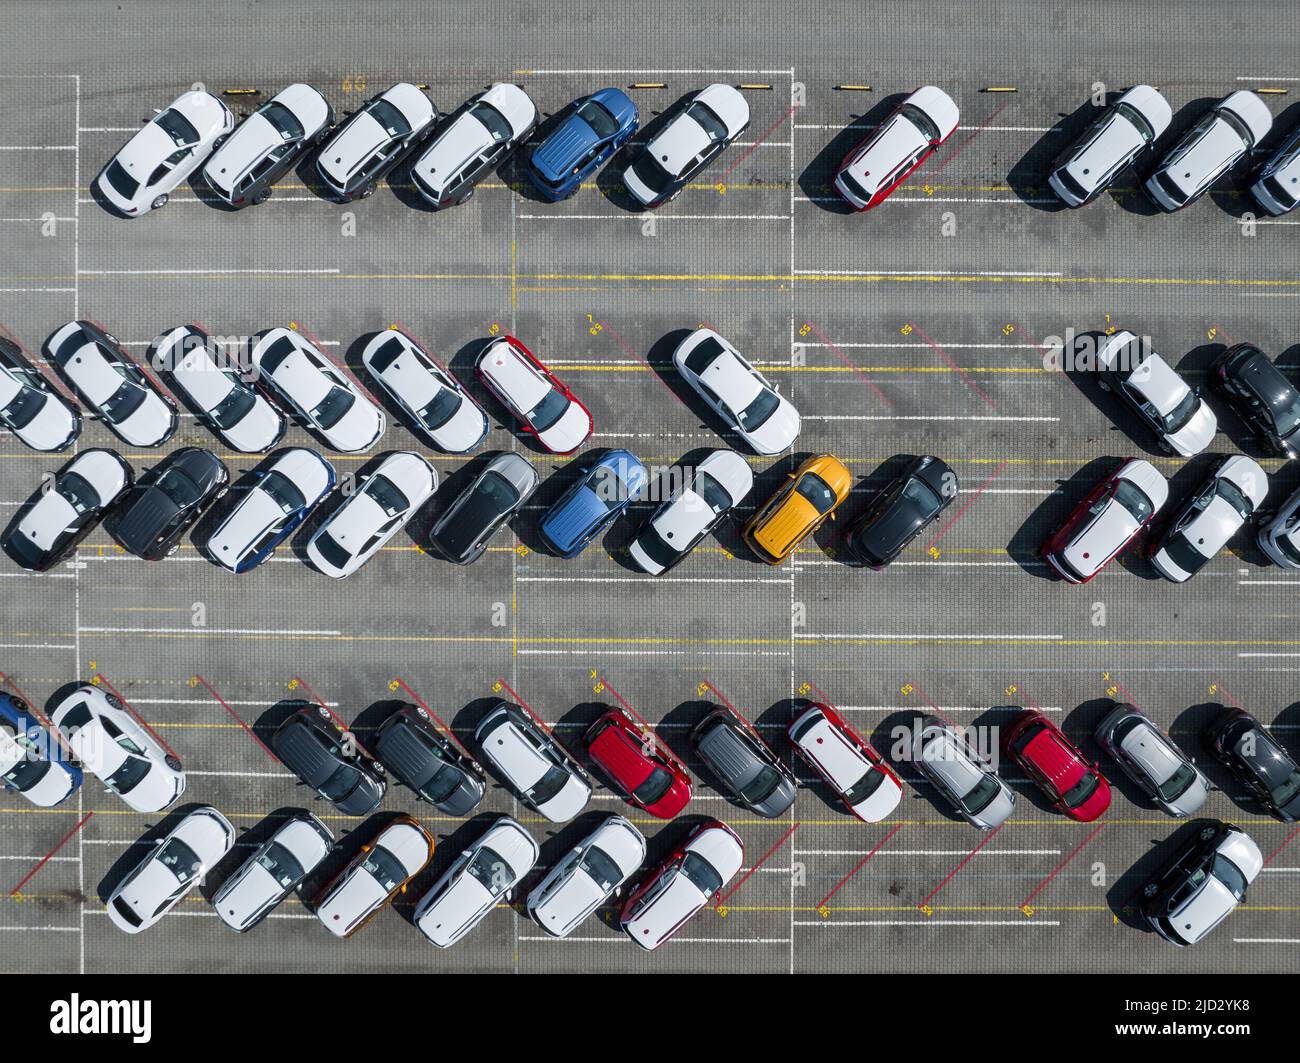 Aerial view new car lined up in the port for import and export business logistic to dealership for sale, Automobile and automotive car parking lot for Stock Photo